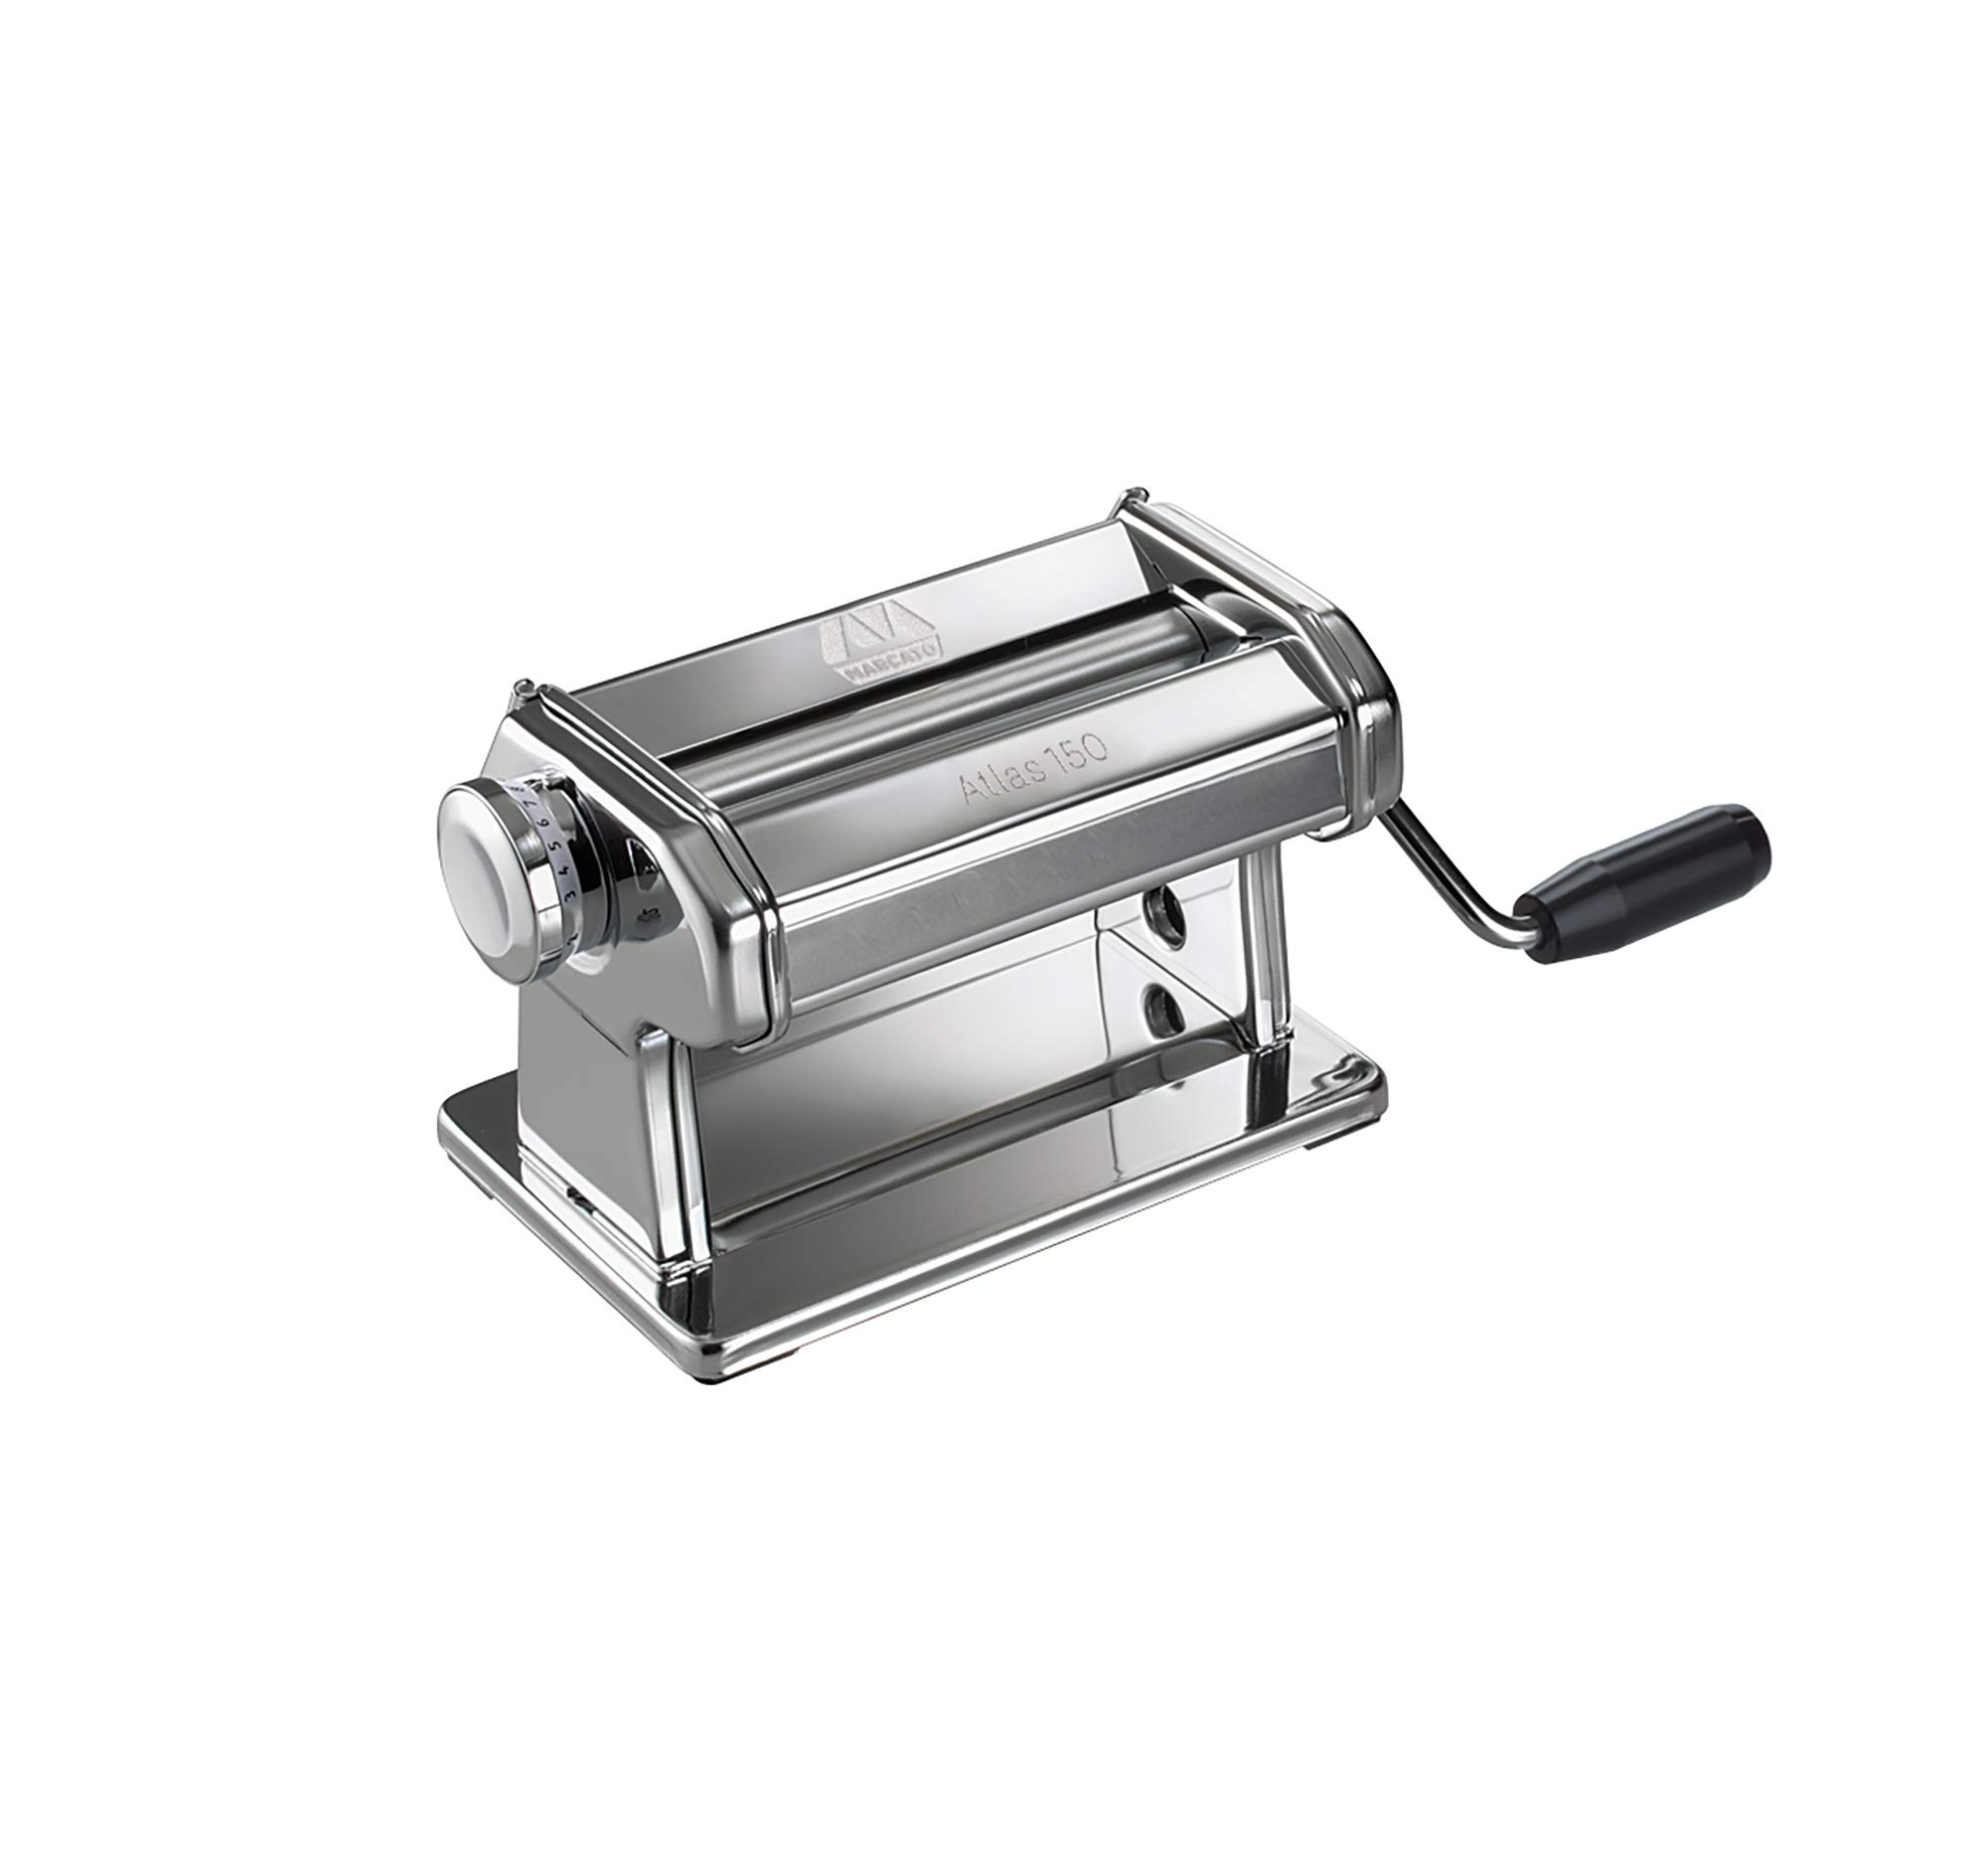 Marcato 8340 Atlas Pasta Dough Roller, Made in Italy, Includes 150-Millimeter Roller with Hand Crank and Instructions, Silver